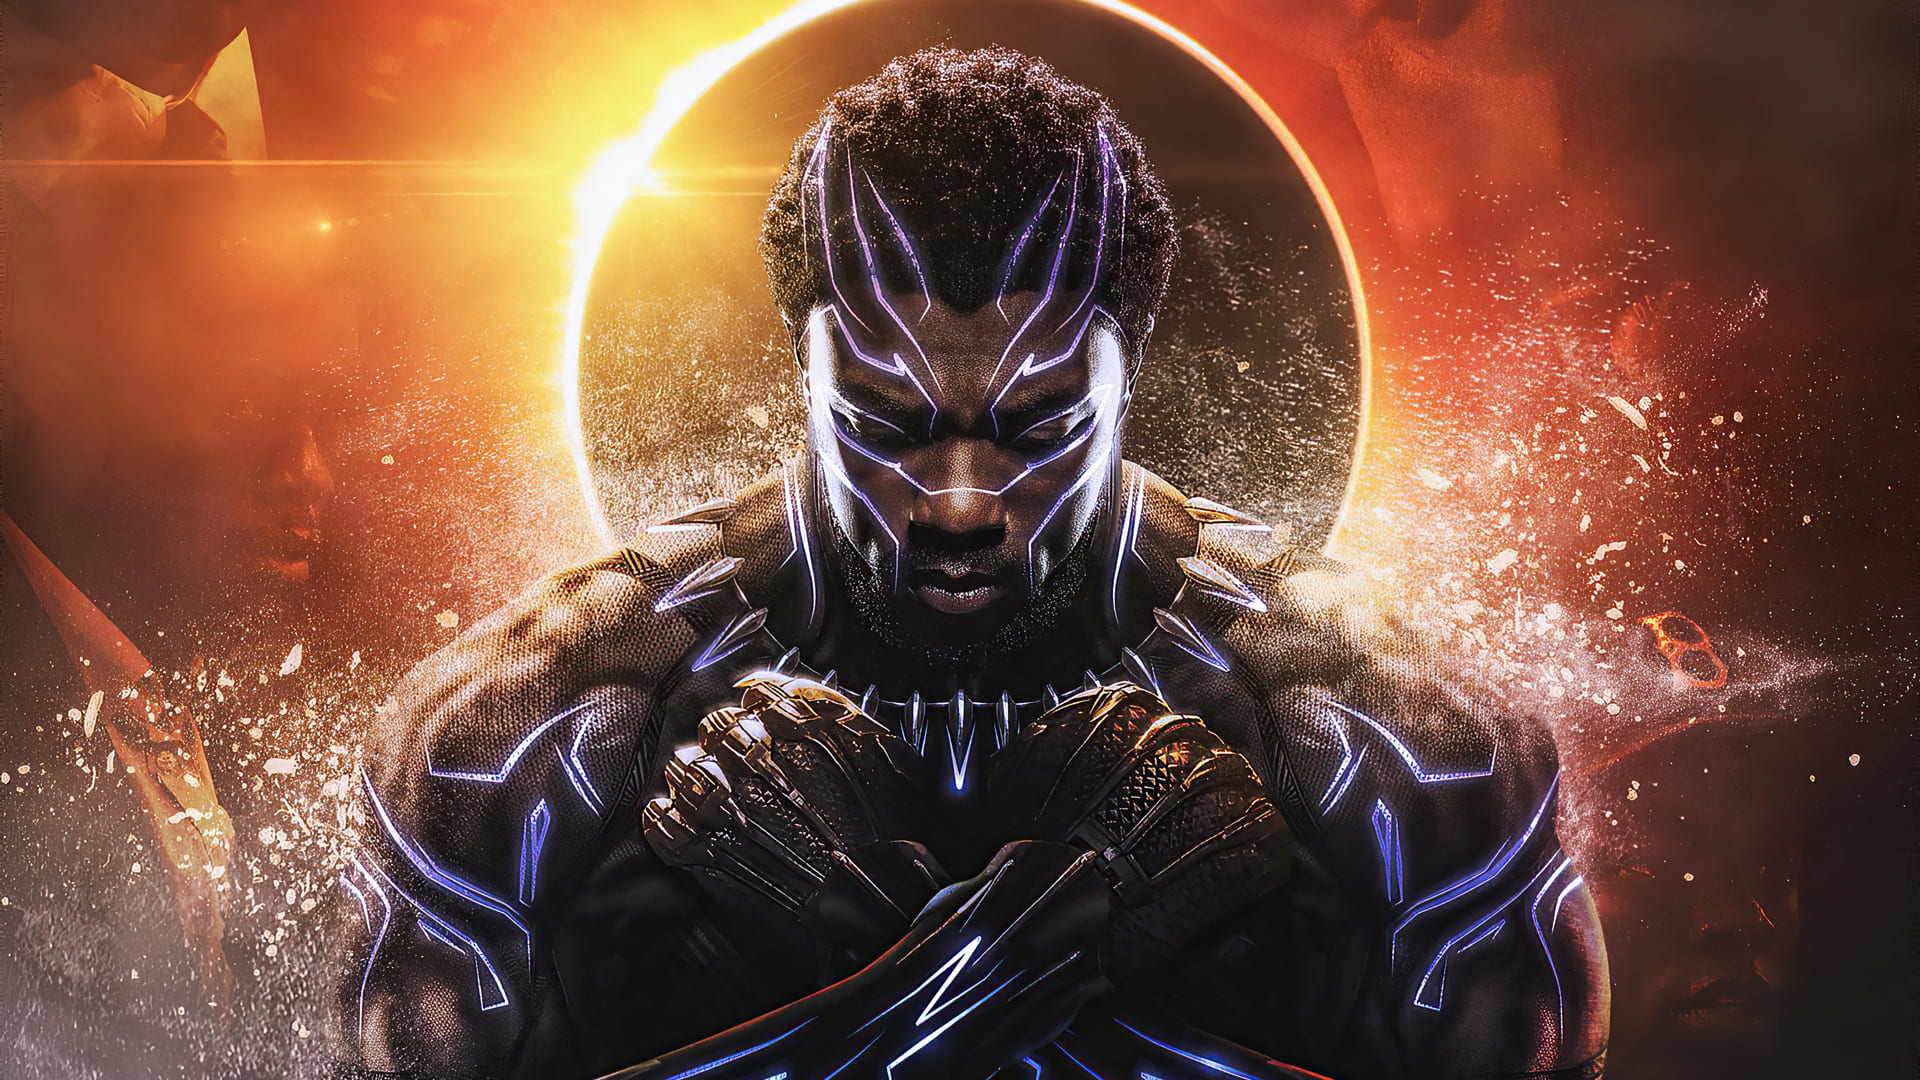 Black Panther Wallpaper For PC